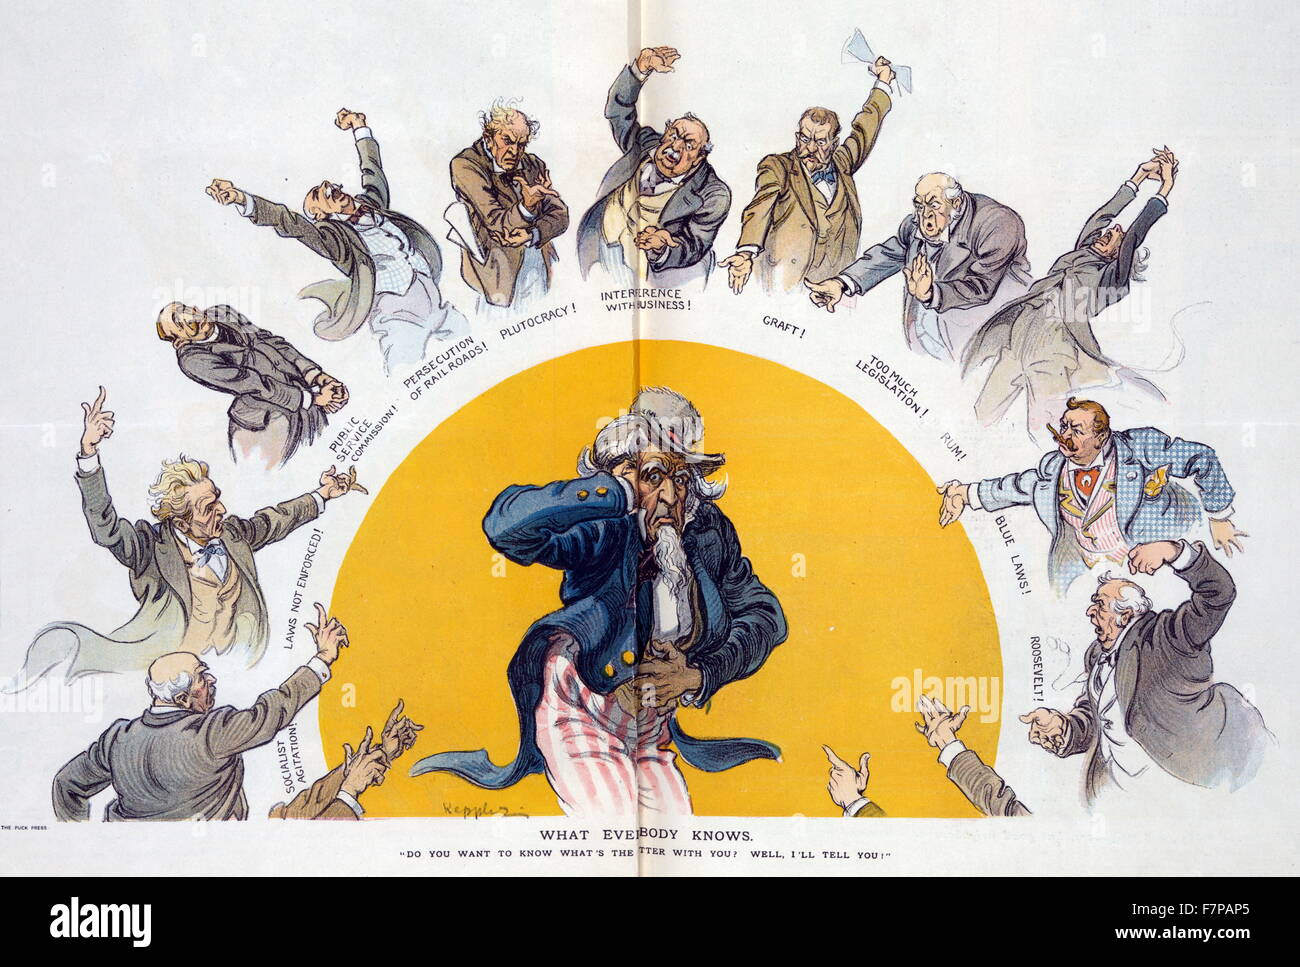 What everybody knows by Udo Keppler (1872-1956). Photomechanical print : offset colour illustration of an ailing Uncle Sam, holding his head and his stomach, standing in the middle of a half=circle with a series of private citizens telling him what ails the county : 'Socialist Agitation!, Laws Not Enforced!, Public Service Commission!, Persecution of Rail Roads!', Plutocracy!, Interference with Business!, Graft!, Too Much Legislation!, Rum!, Blue Laws!, and Roosevelt!'. Stock Photo